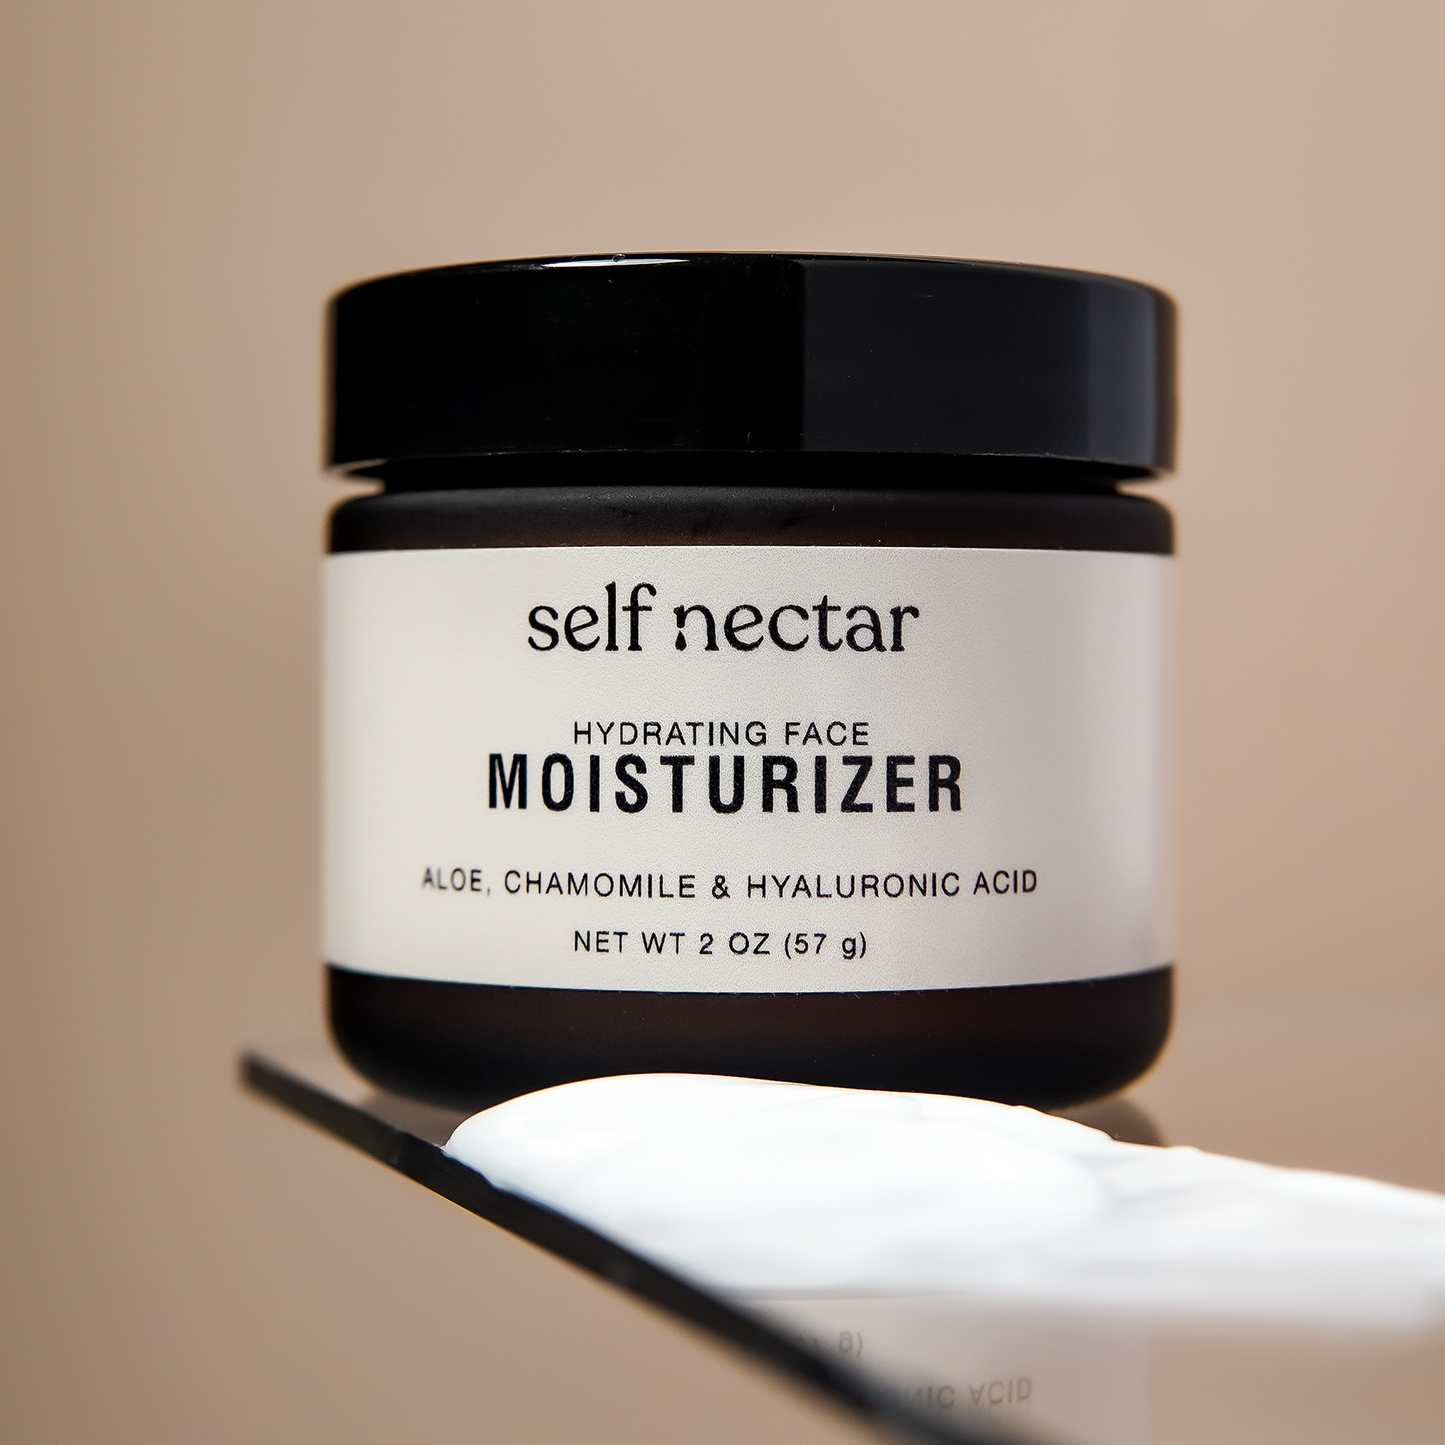 A hydrating face moisturizer in an amber container positioned on a glass surface, accompanied by a cream swatch in the foreground. The product is labeled as a hydrating face moisturizer, featuring a clean and minimalist skincare design.